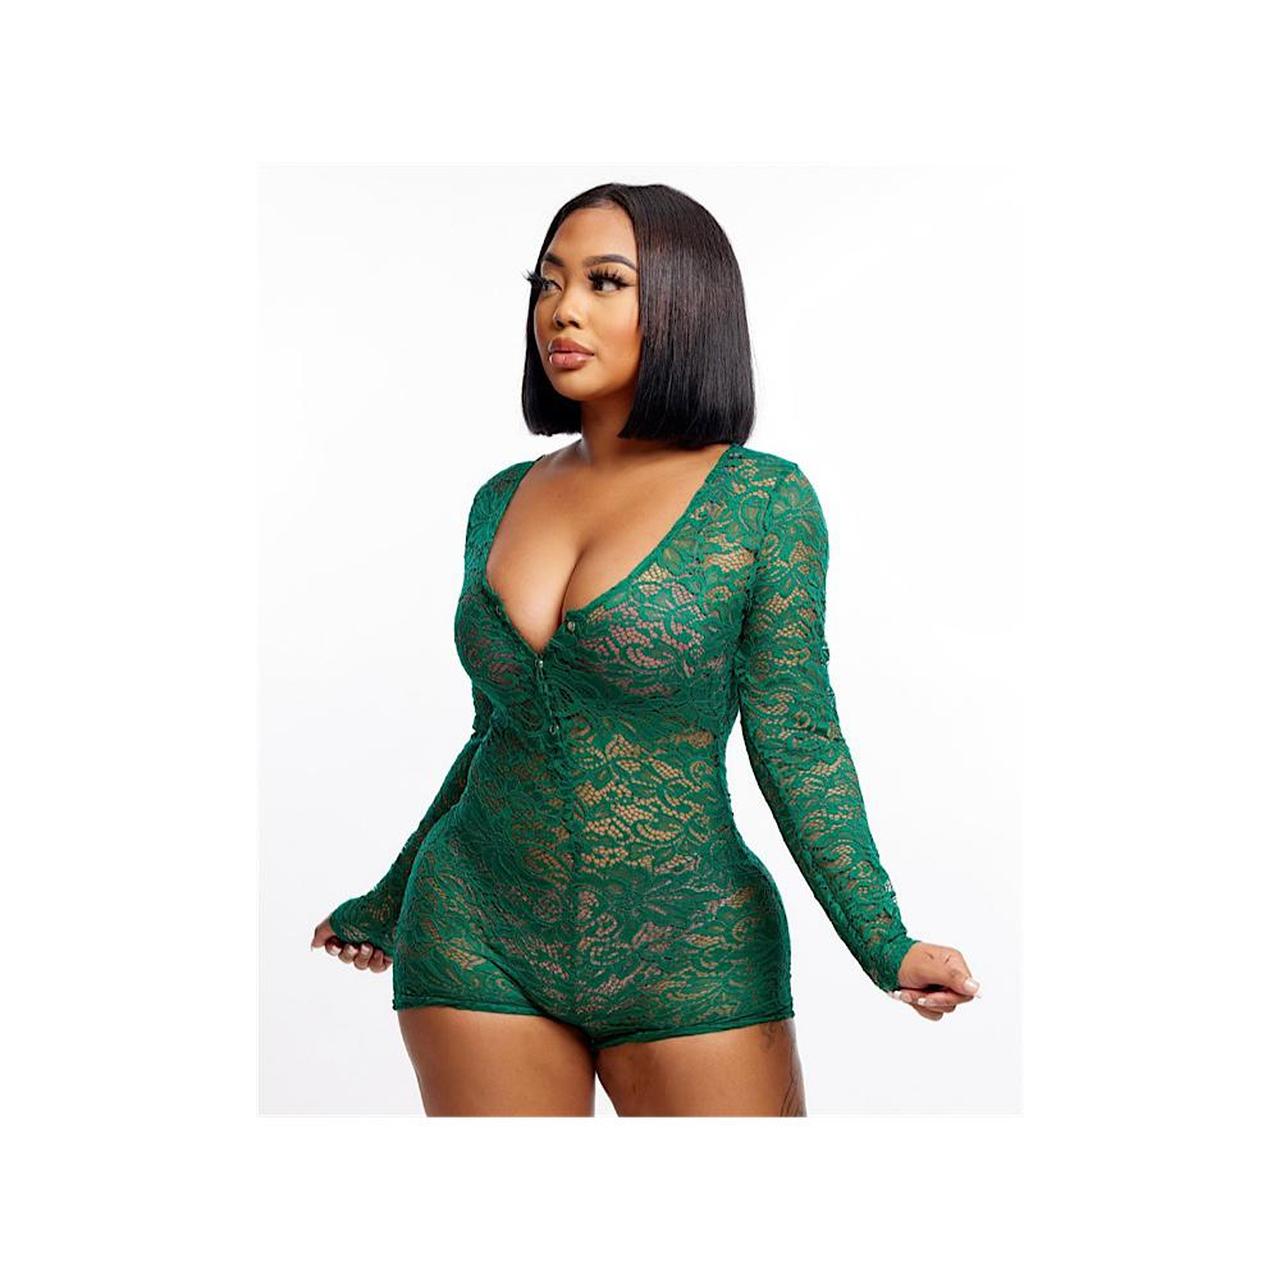 Product Image 1 - This green colored lingerie style